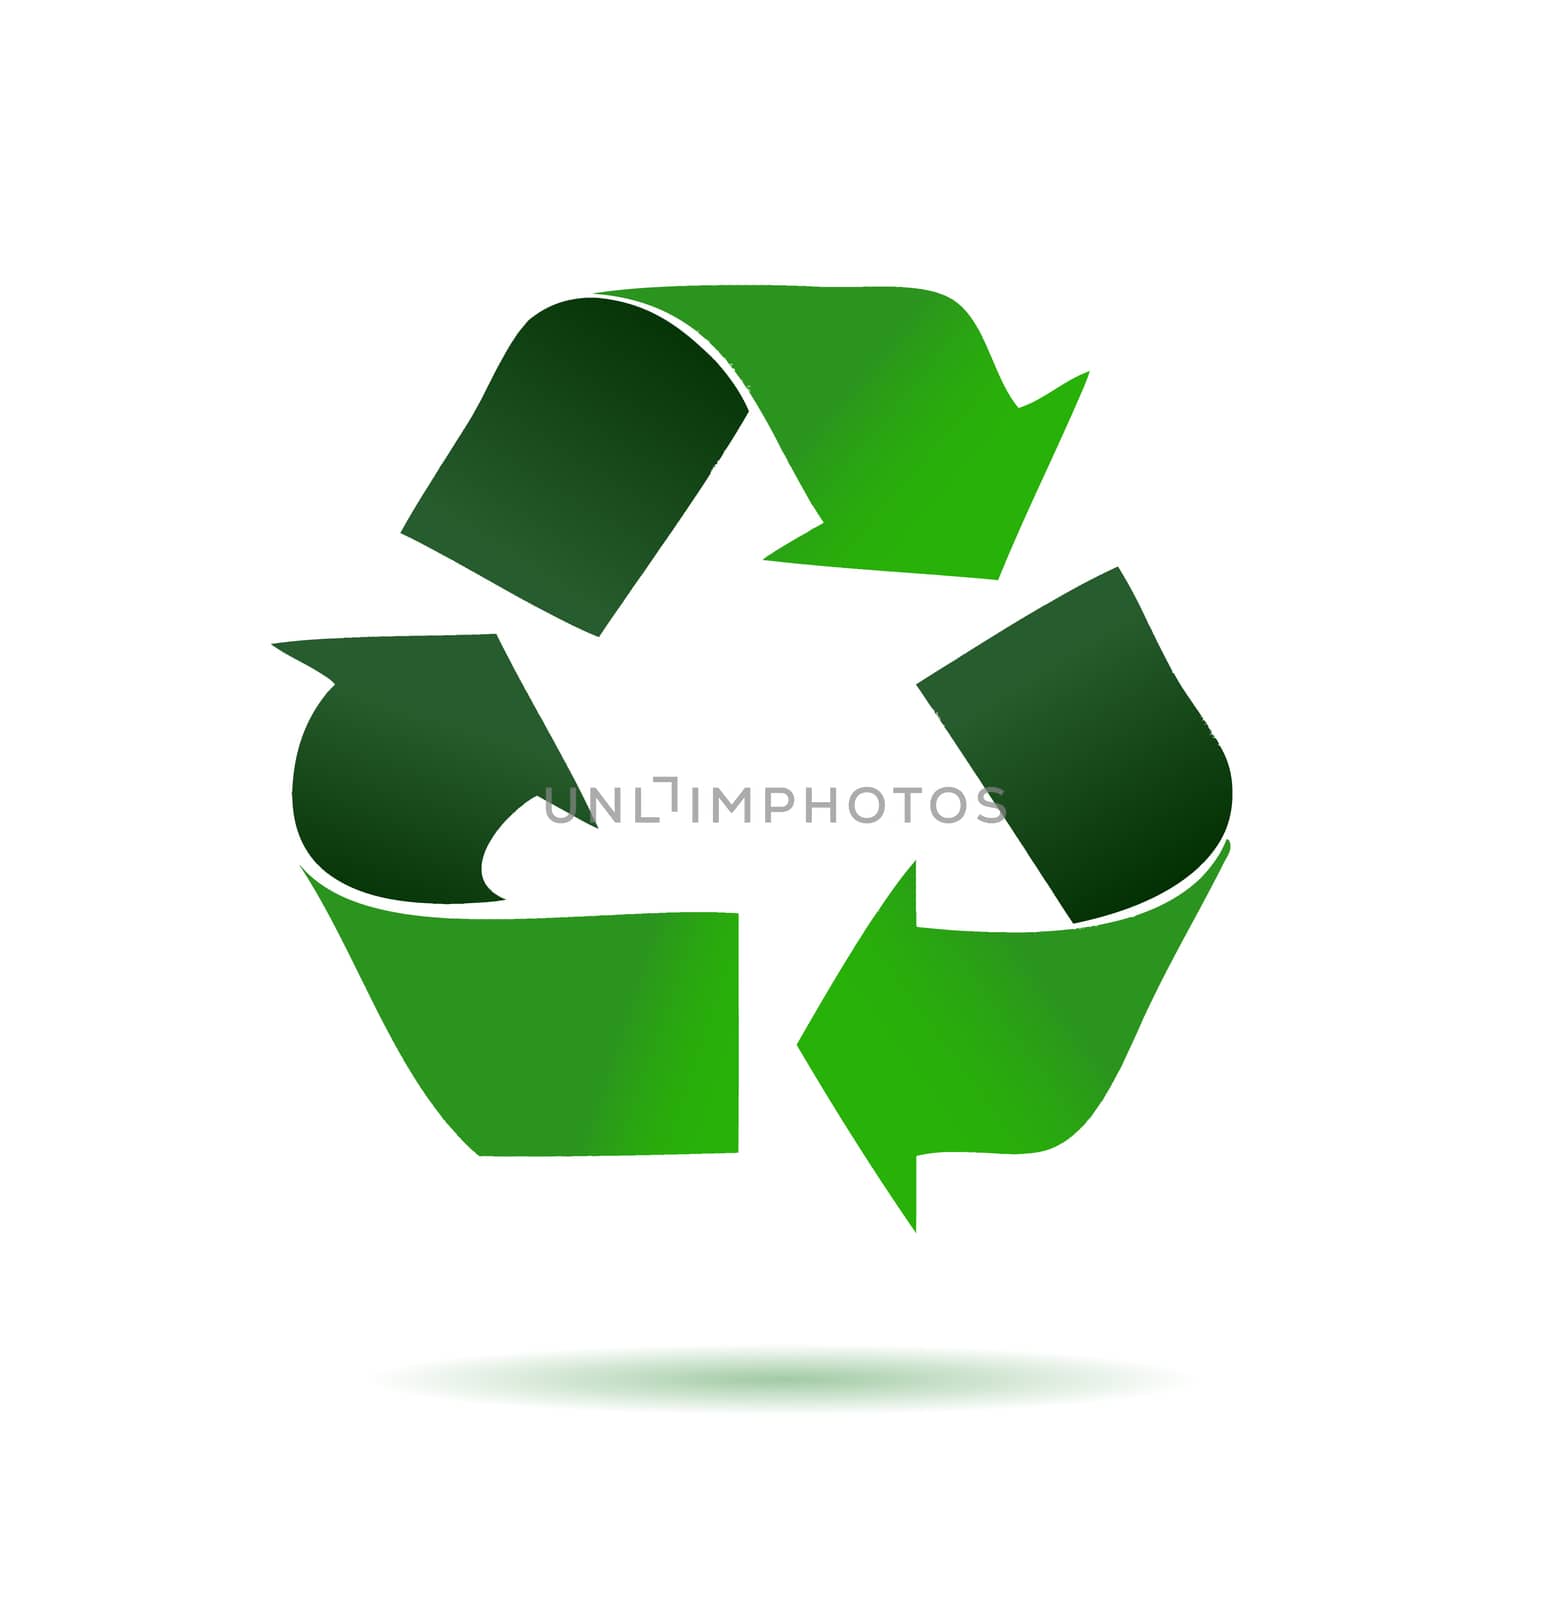 Green recycling logo over a white background. illustration desig by alexmillos